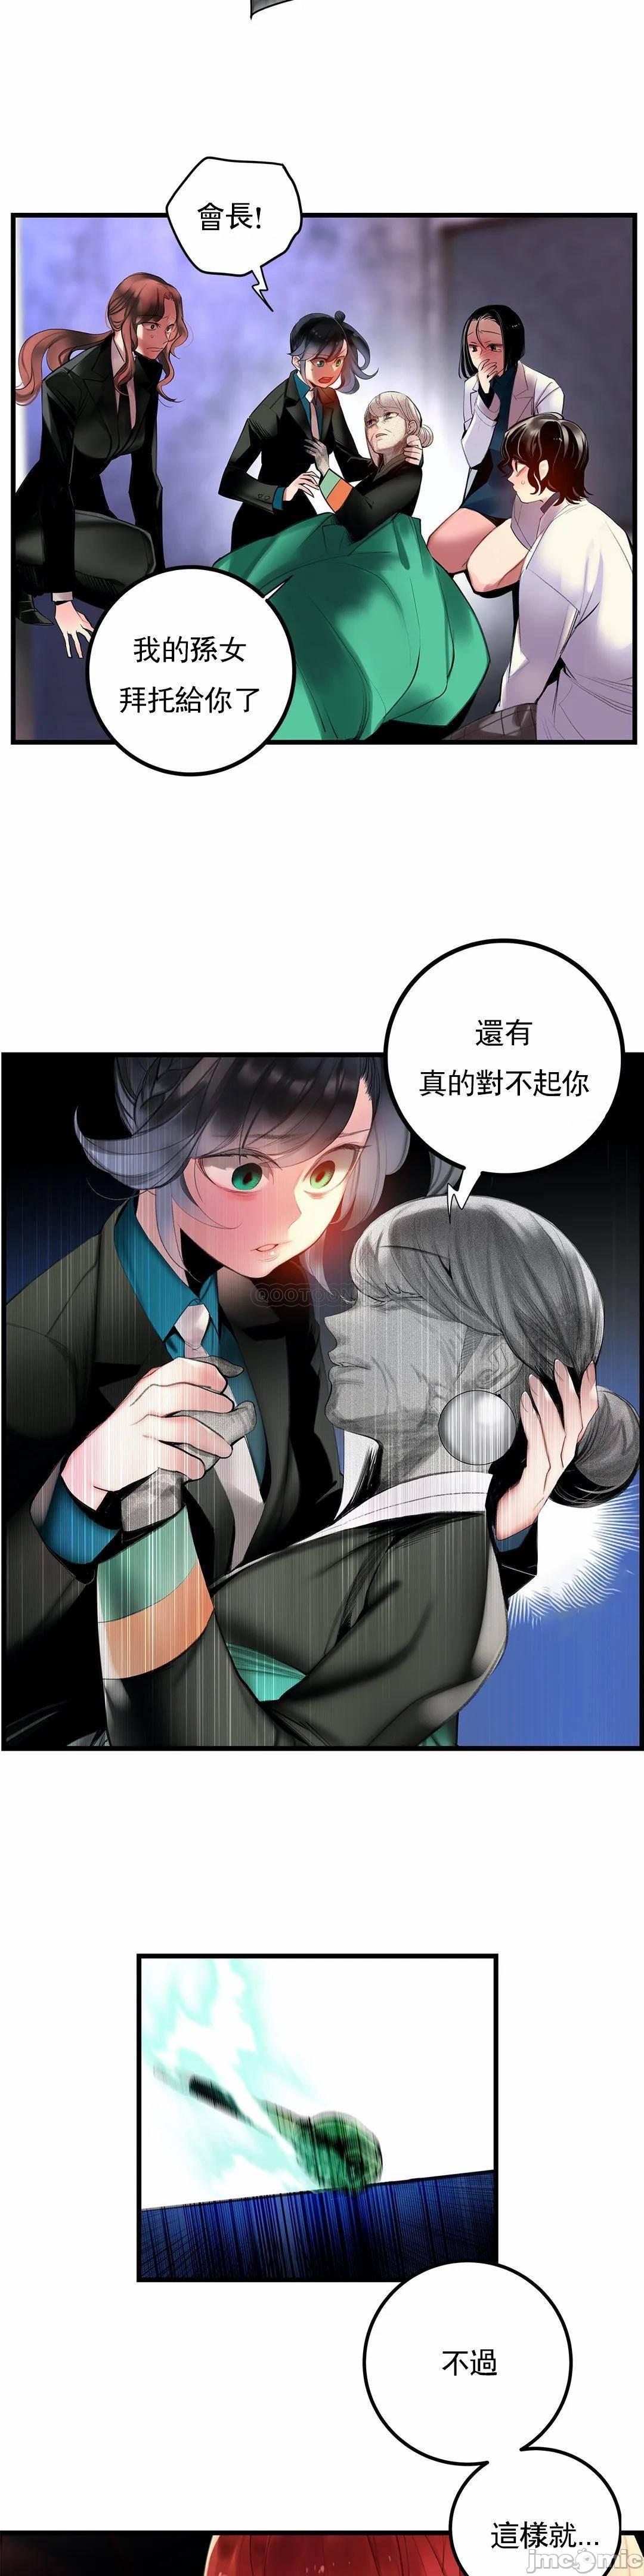 [Juder] Lilith`s Cord (第二季) Ch.77-93 end [Chinese] 437